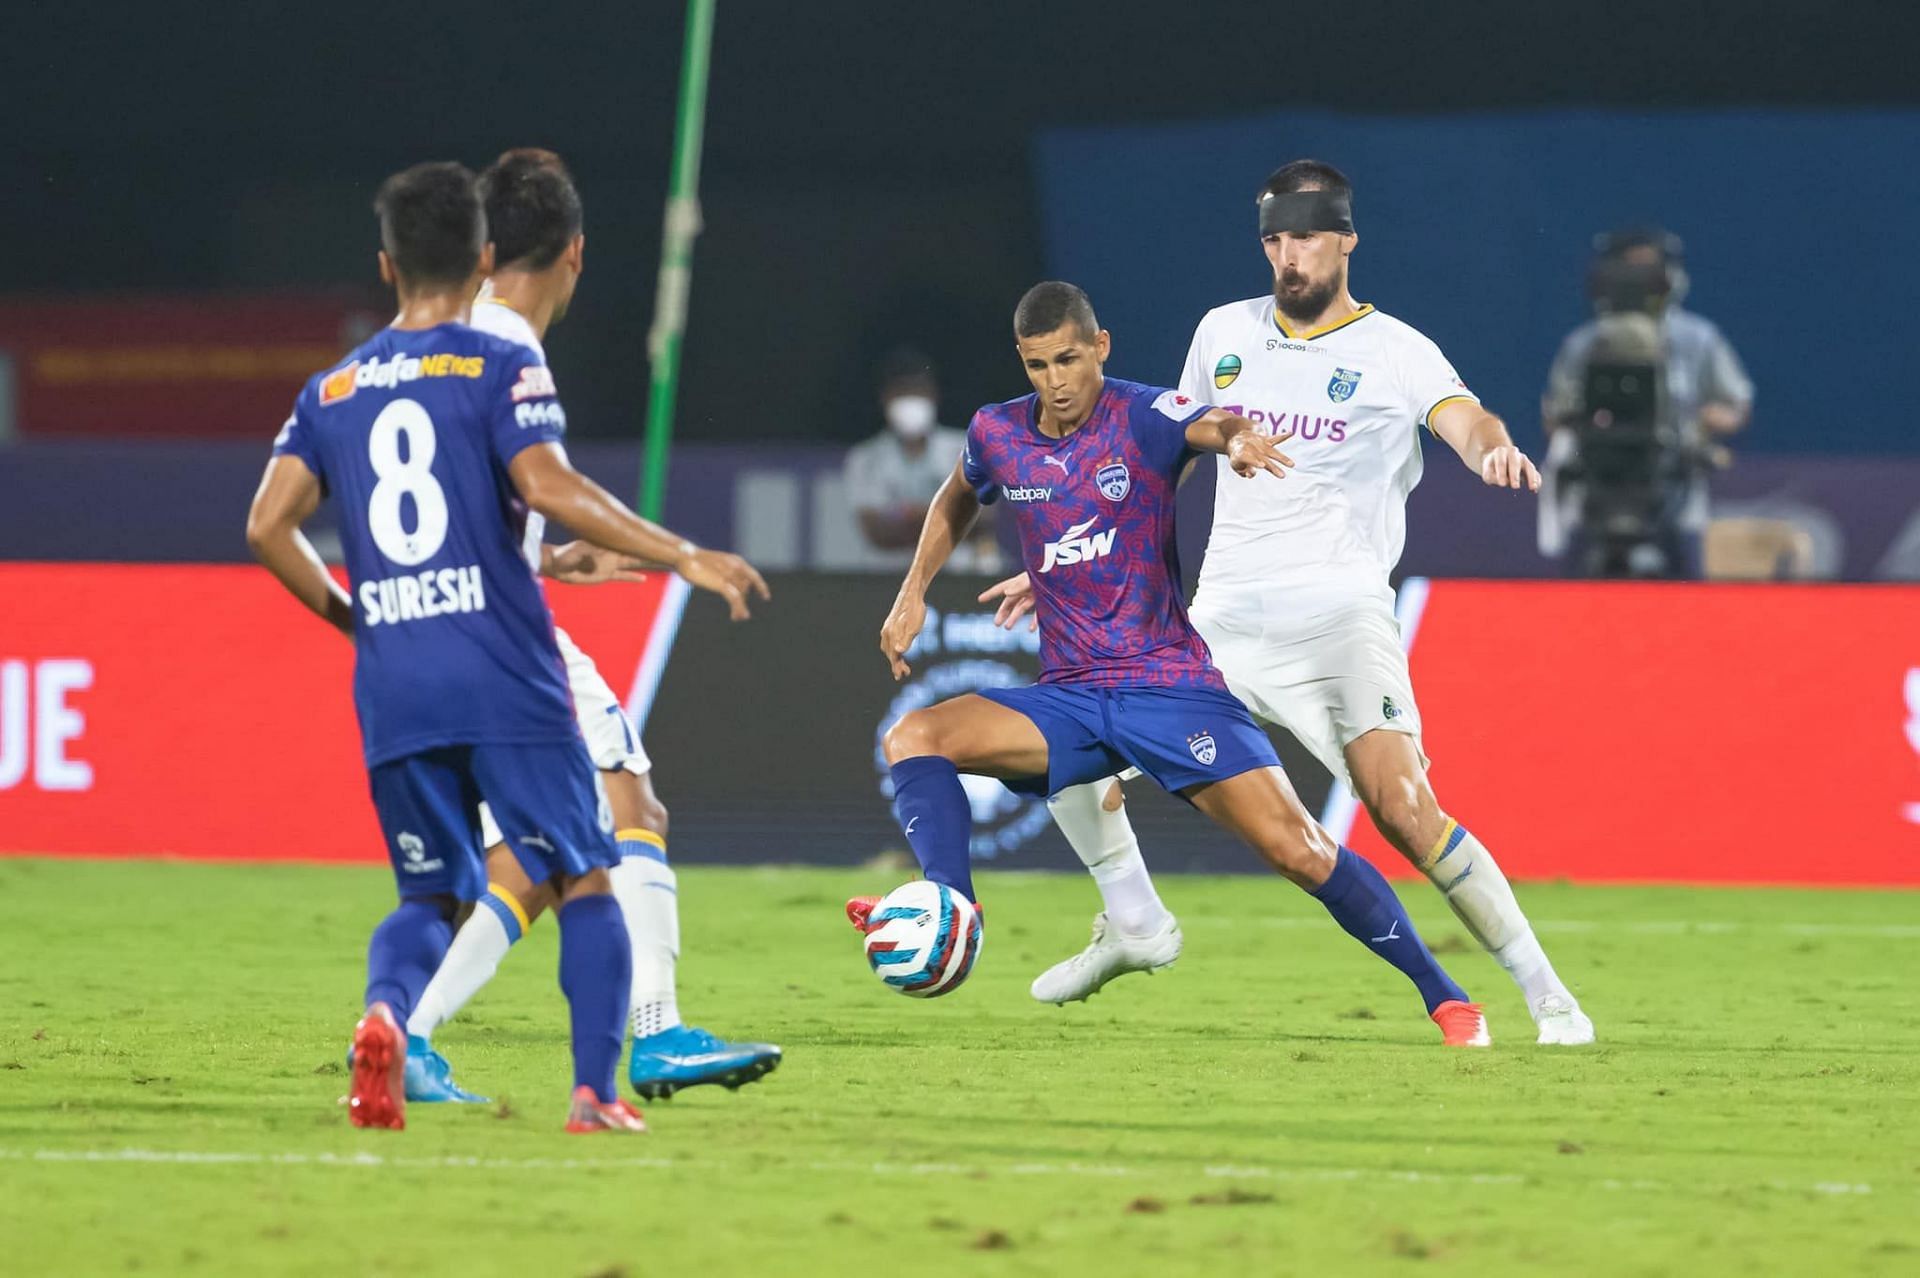 The match today ended in a draw (Pic courtesy: ISL social media)